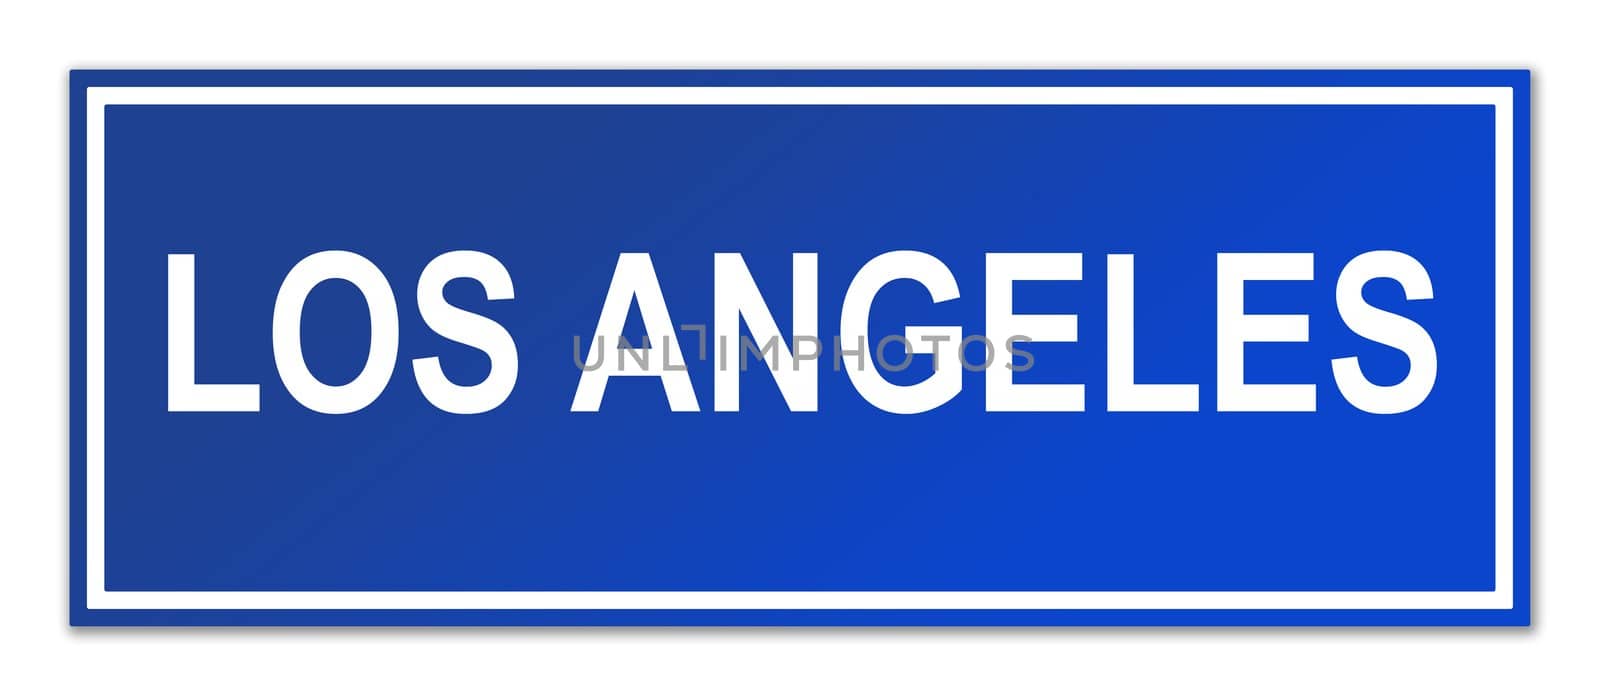 Los Angeles city street sign isolated on white background with copy space.